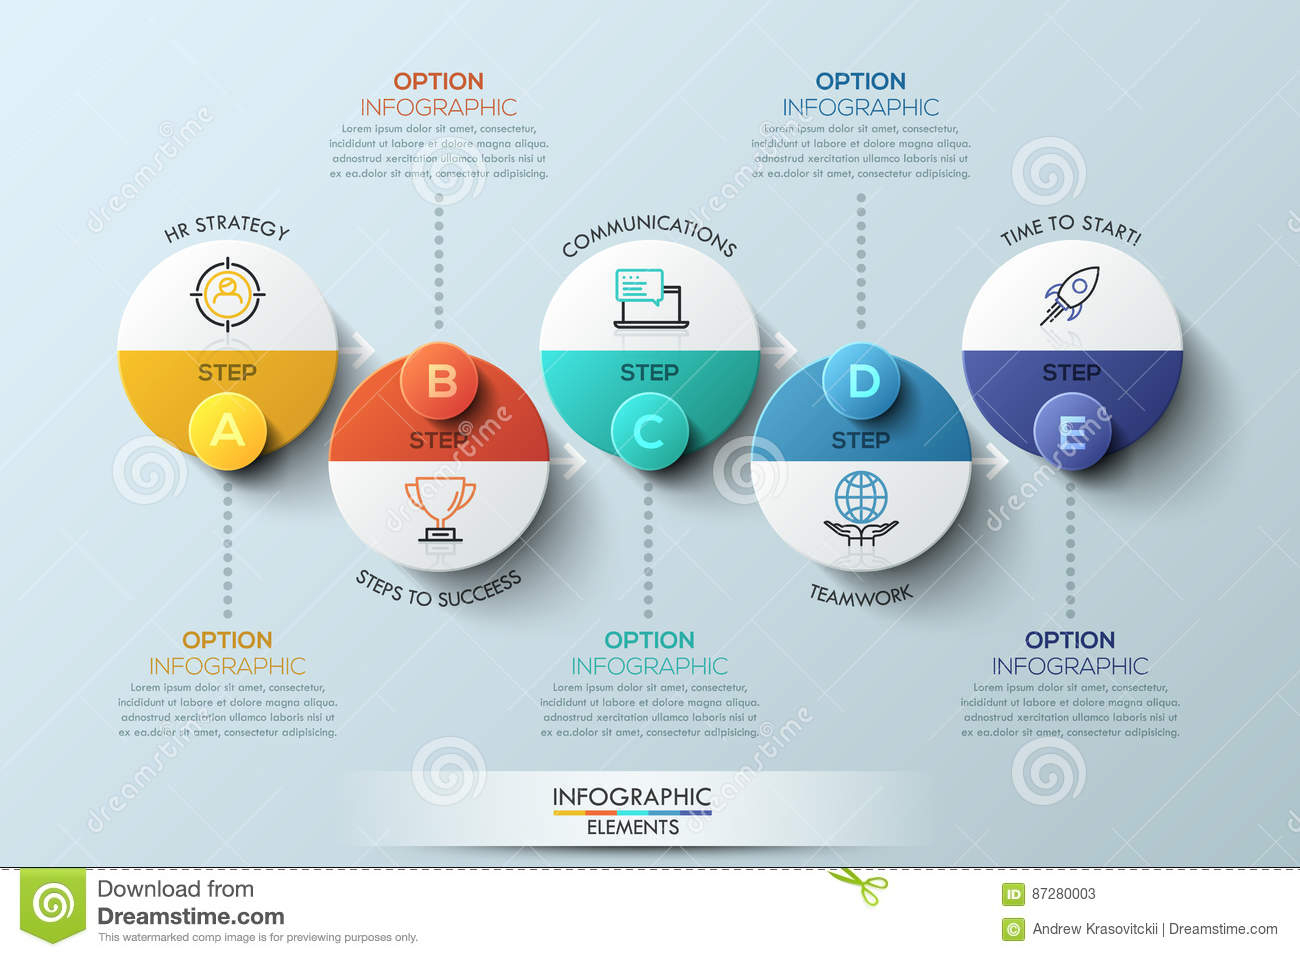 Infographic Design Template With Circular Elements, 5 Steps To with Project Management Design Templates